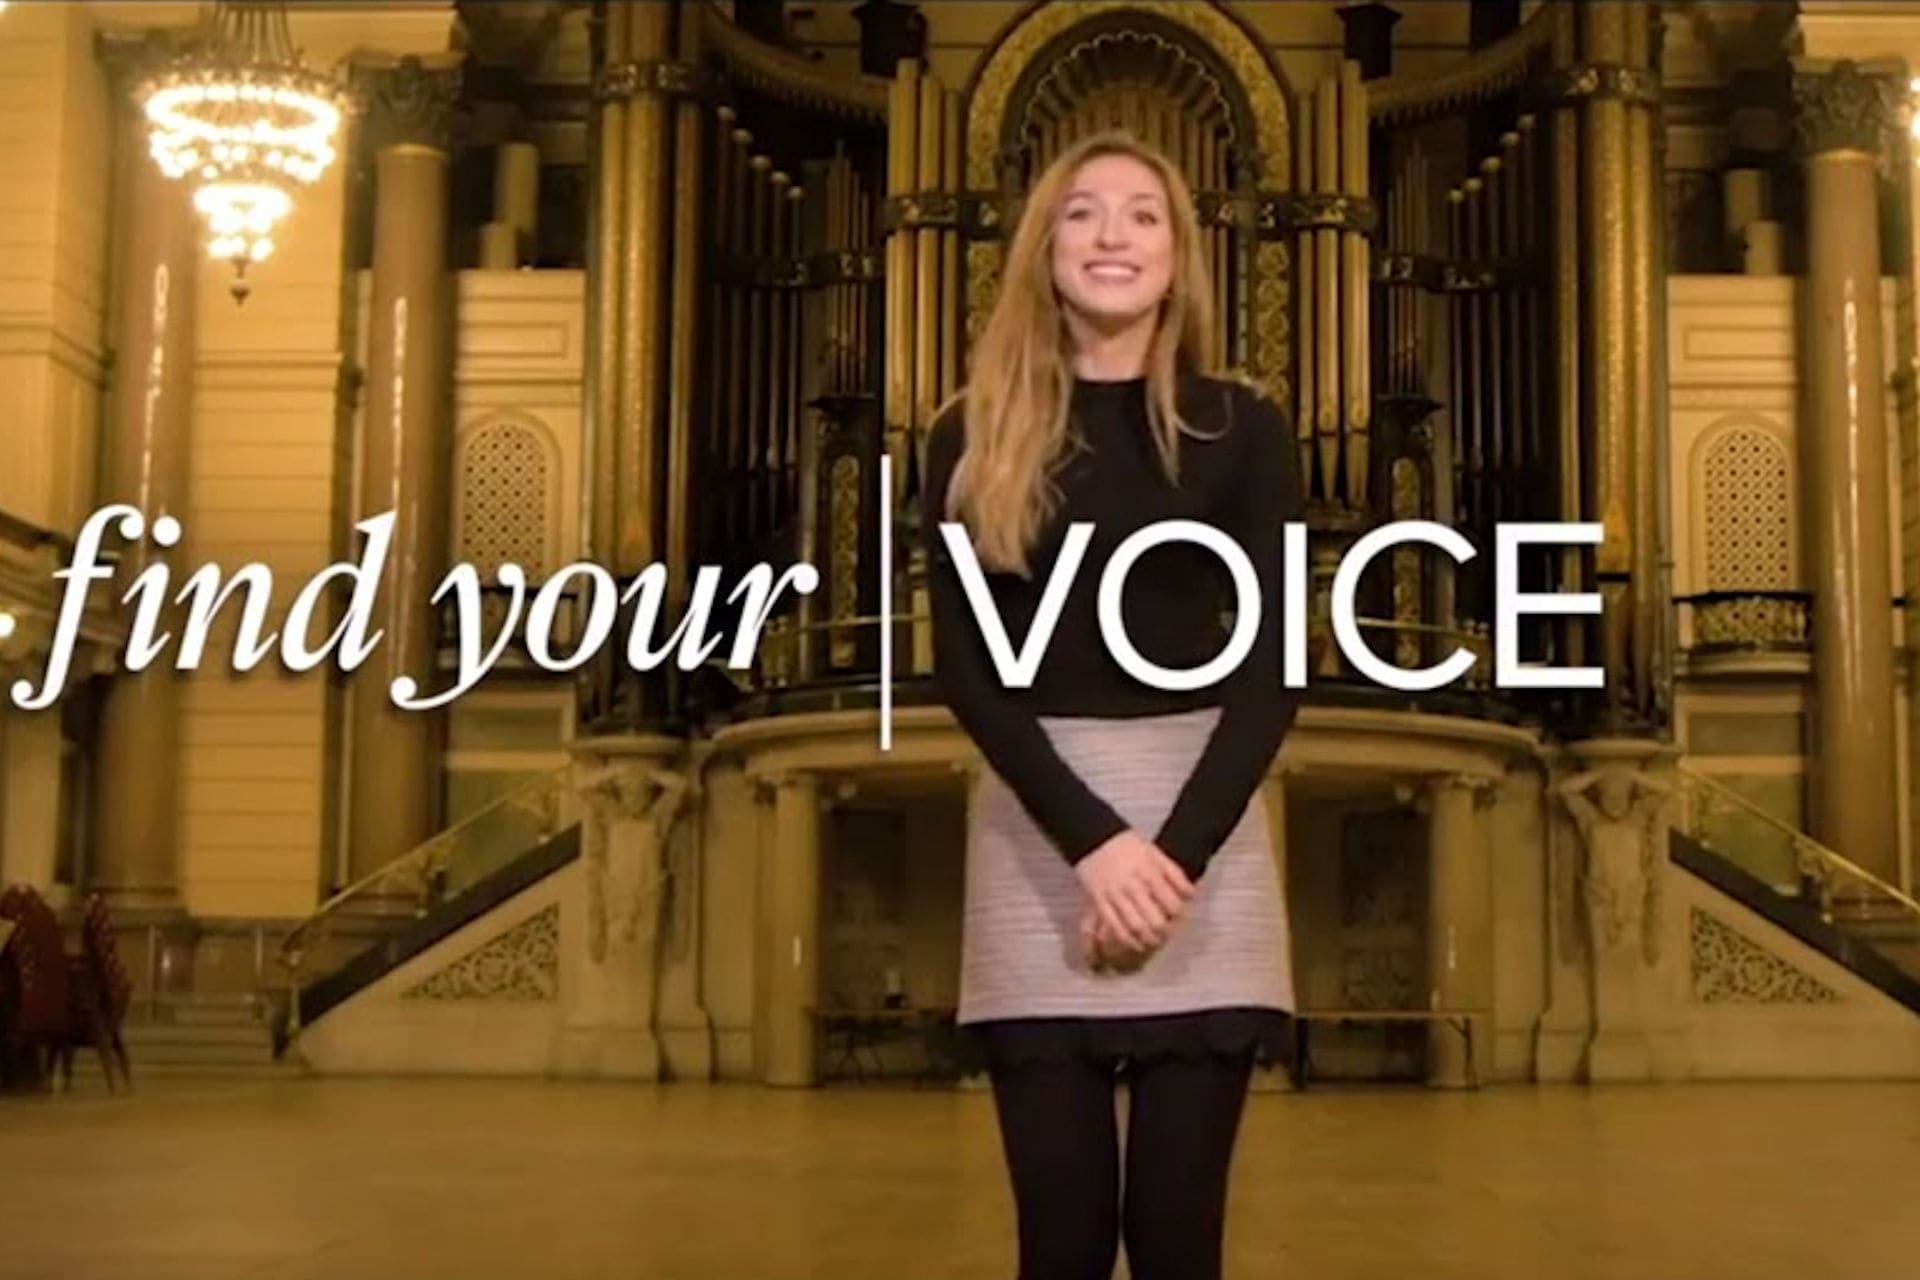 Student stood inside Cathedral building with words Find your VOICE overlaid